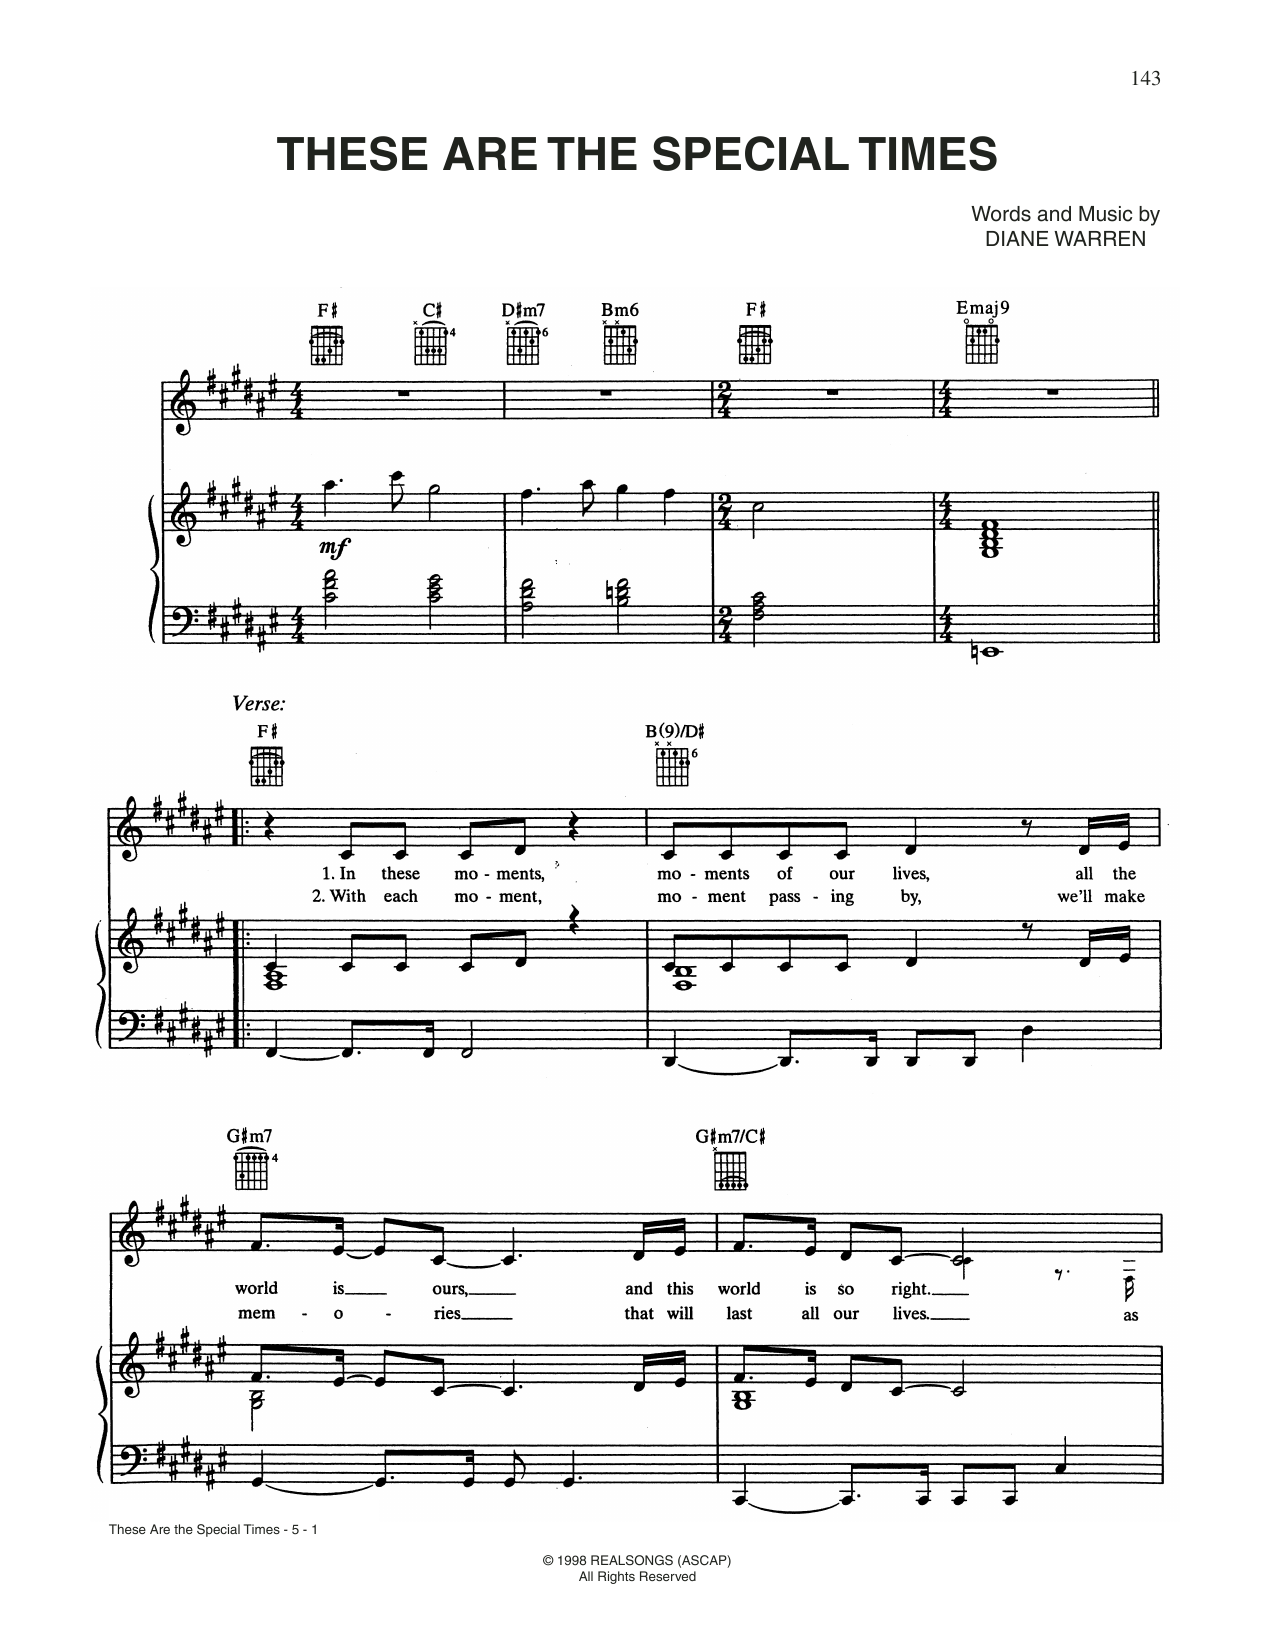 Download CÉLINE DION These Are Special Times Sheet Music